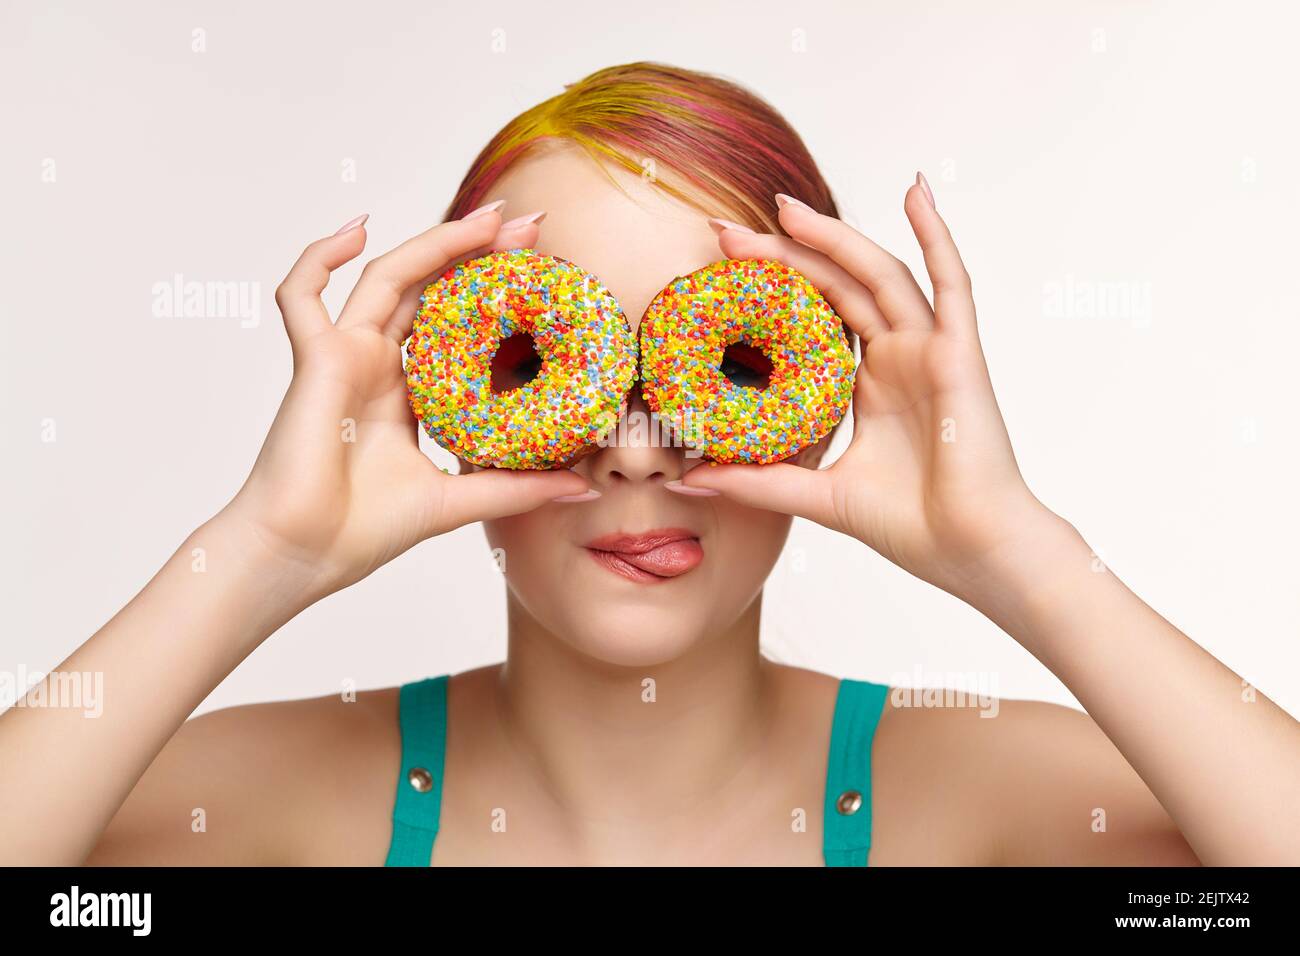 Teenager girl with unusual face art make-up . Child with donuts in hands closing eyes and looking through holes in donuts and showing tongue. Sweet to Stock Photo